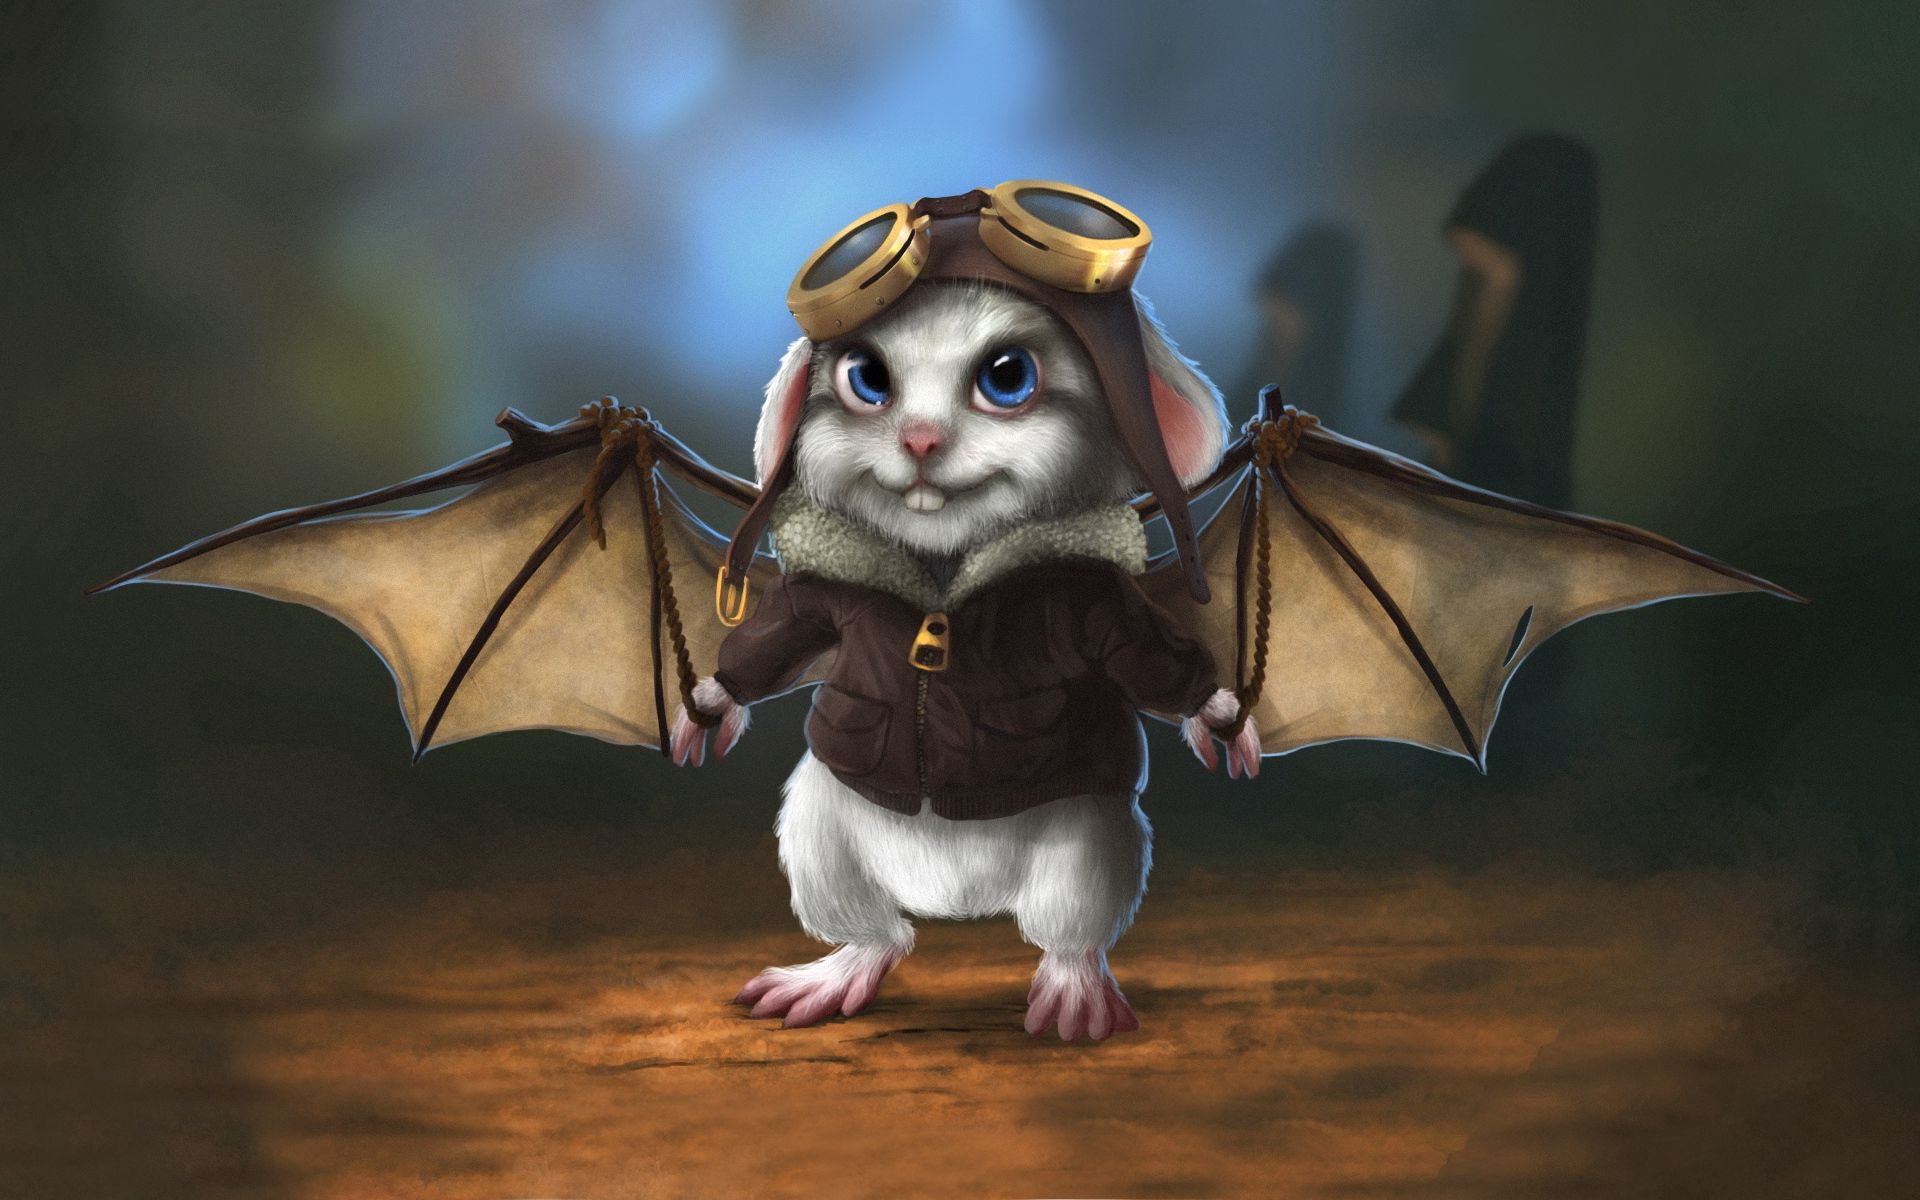 120559 Screensavers and Wallpapers Rabbit for phone. Download fantasy, wings, rabbit, pilot, bat pictures for free